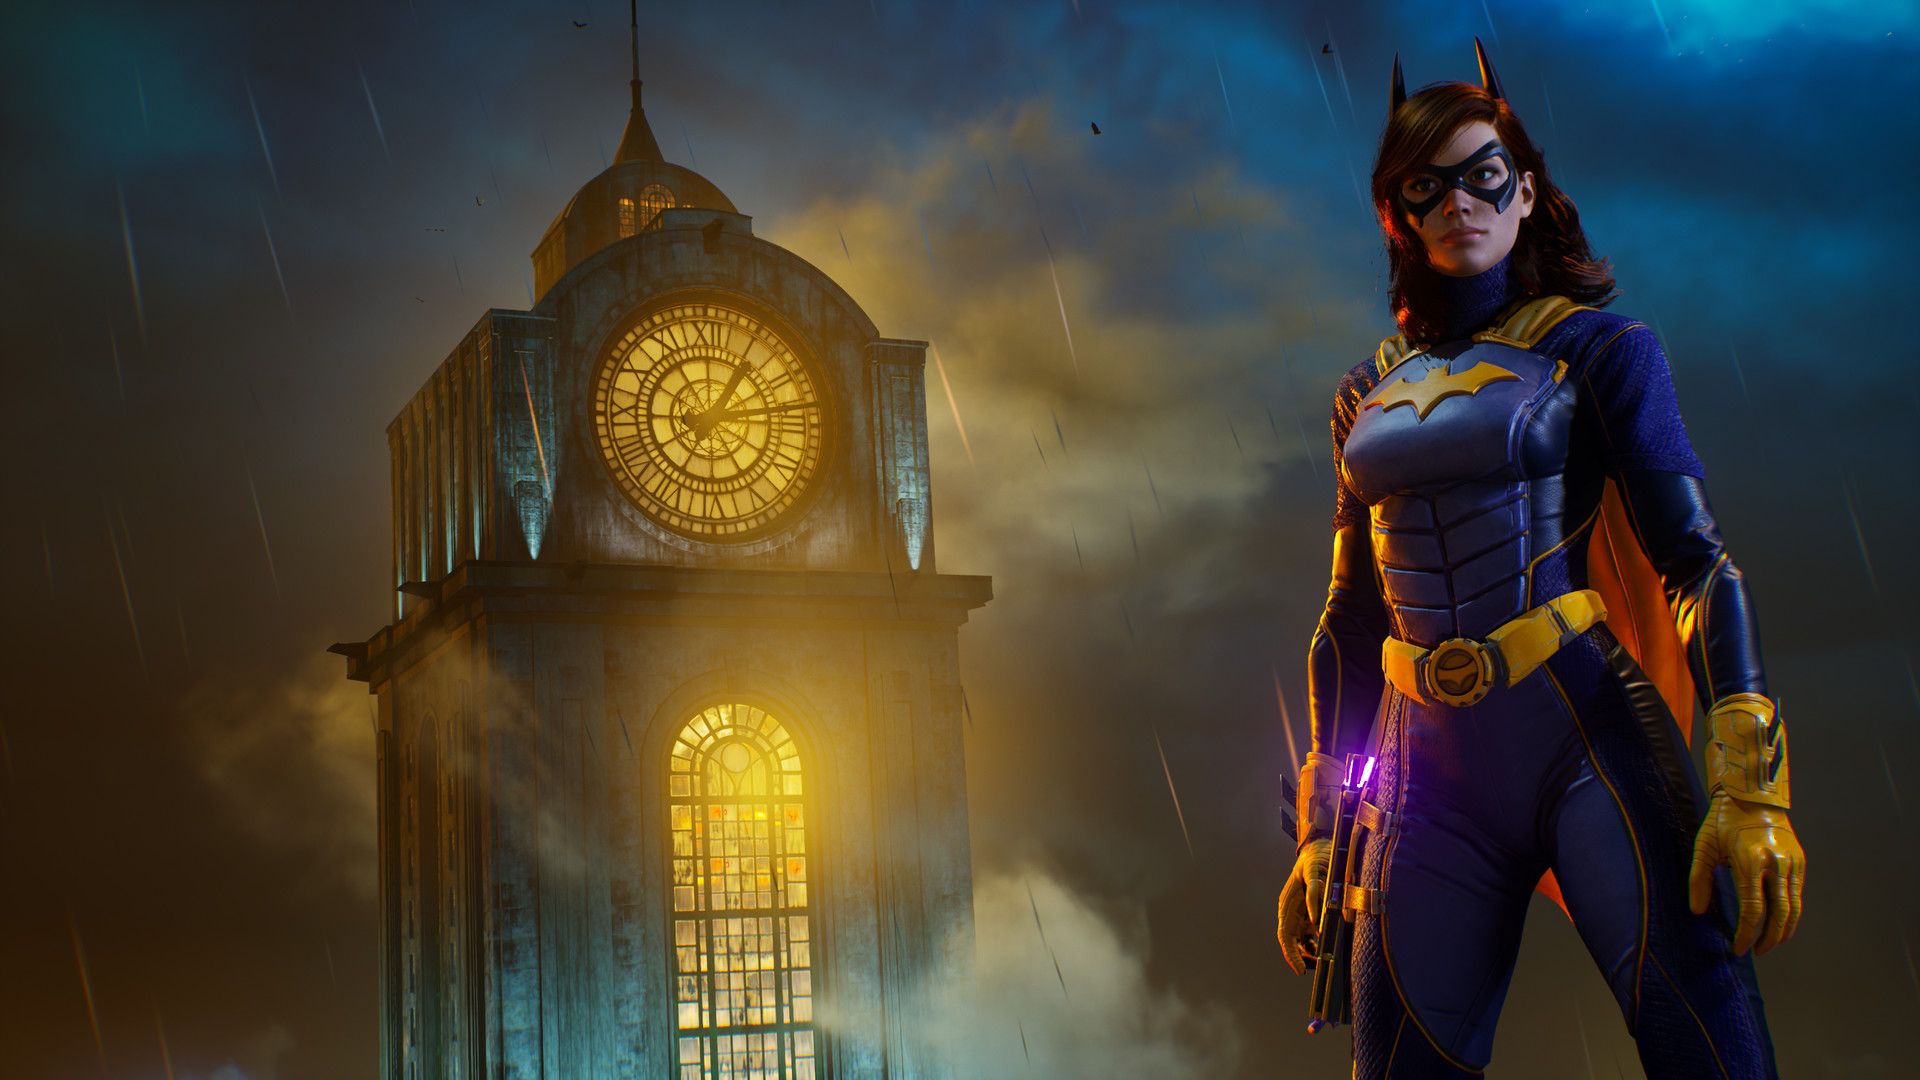 In this article, we are going to be covering Gotham Knights story spoilers: Ending explained, so you exactly know what the ending of the game is all about.